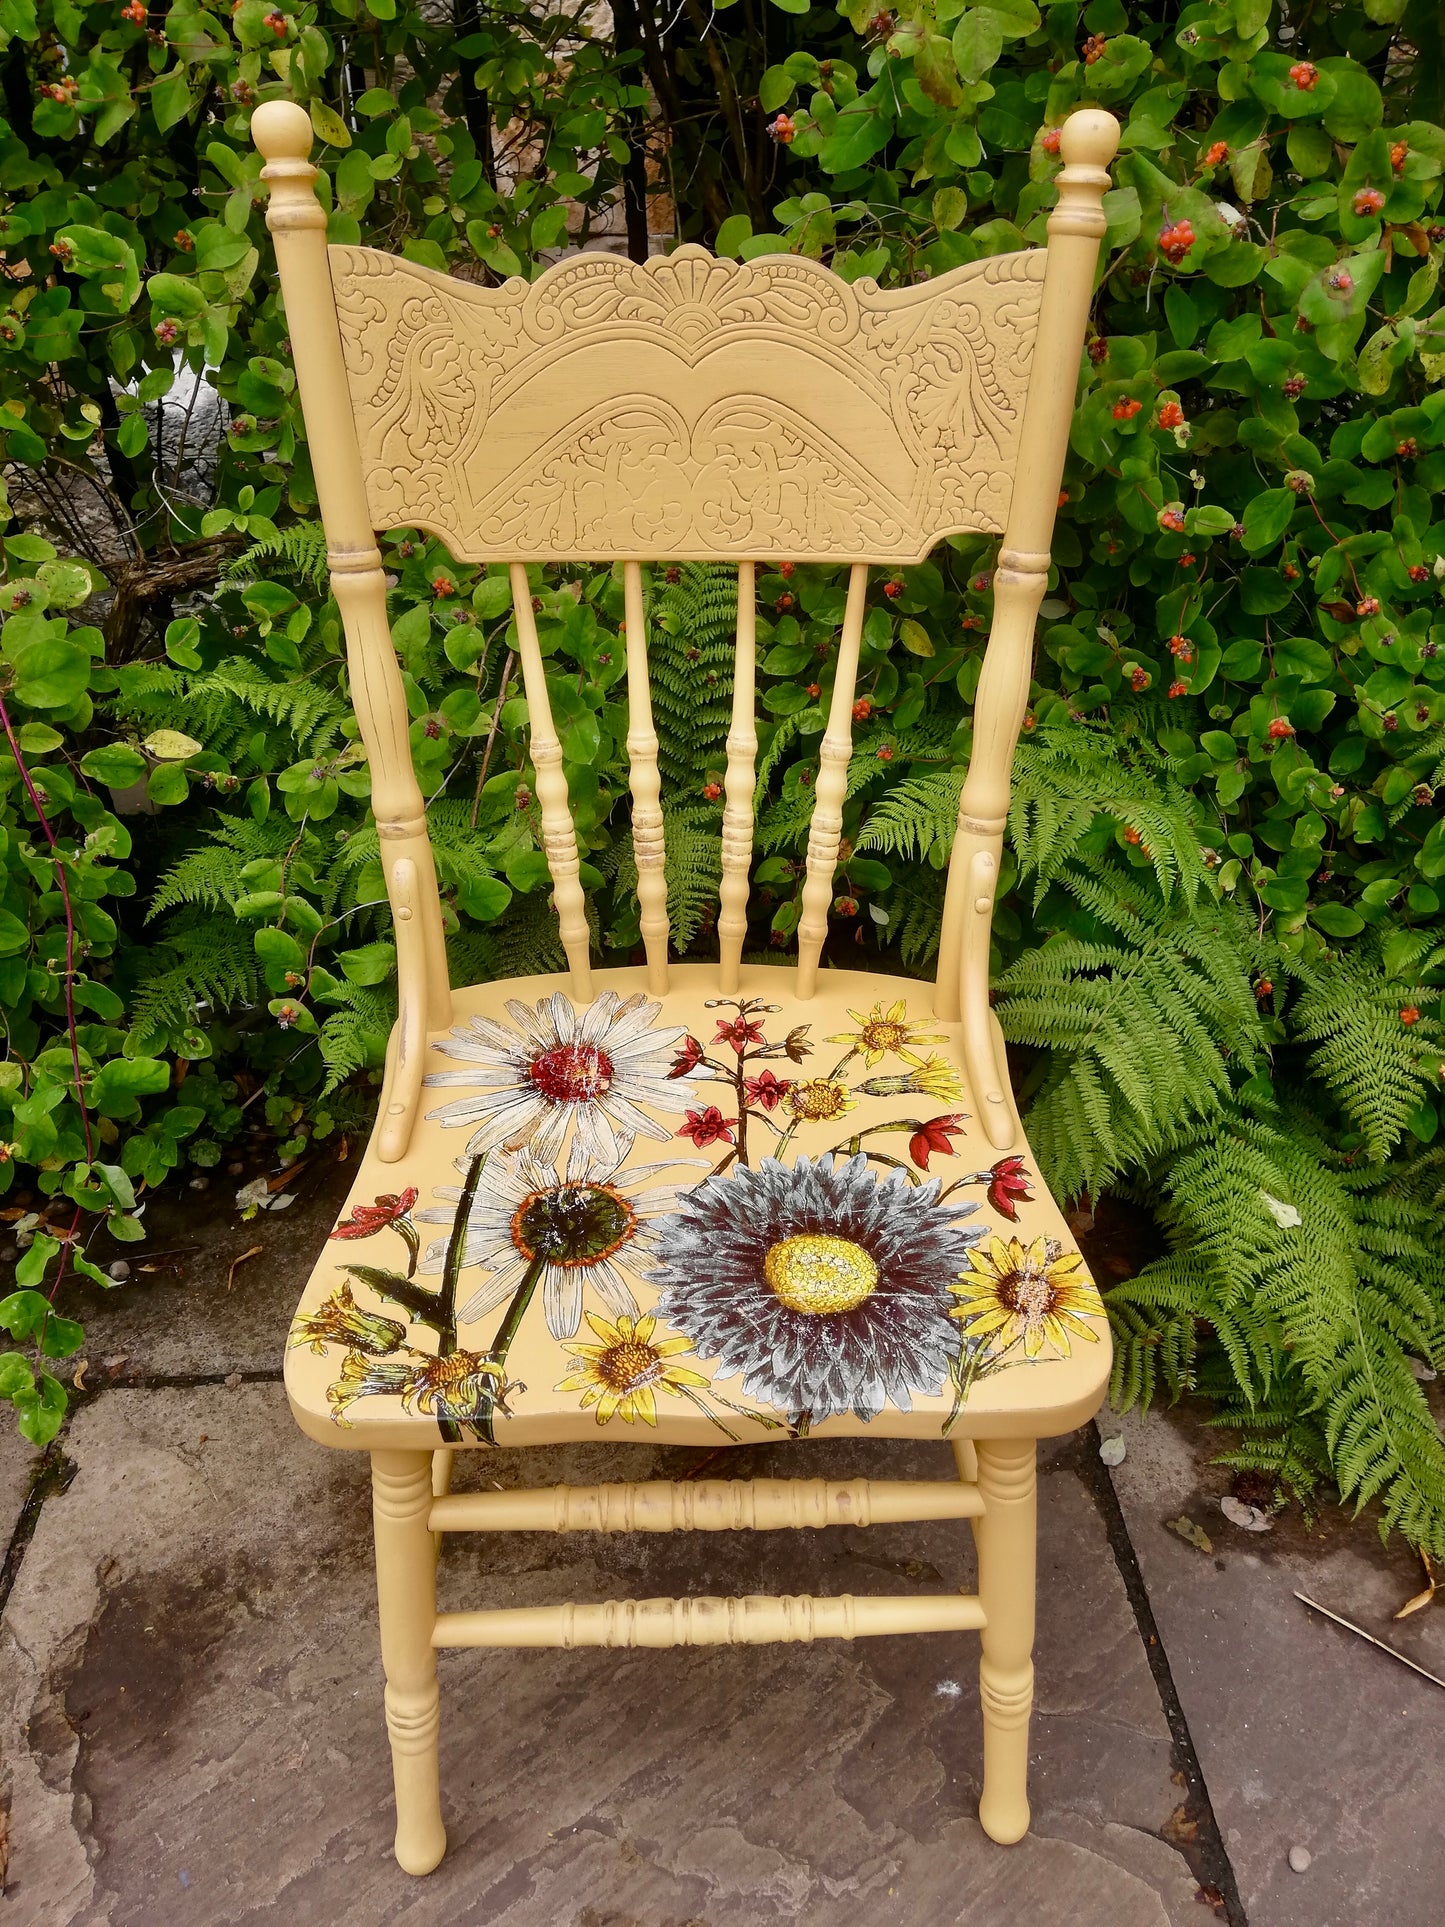 Commission for Sarah Painted Folksy chair with IOD wildflowers